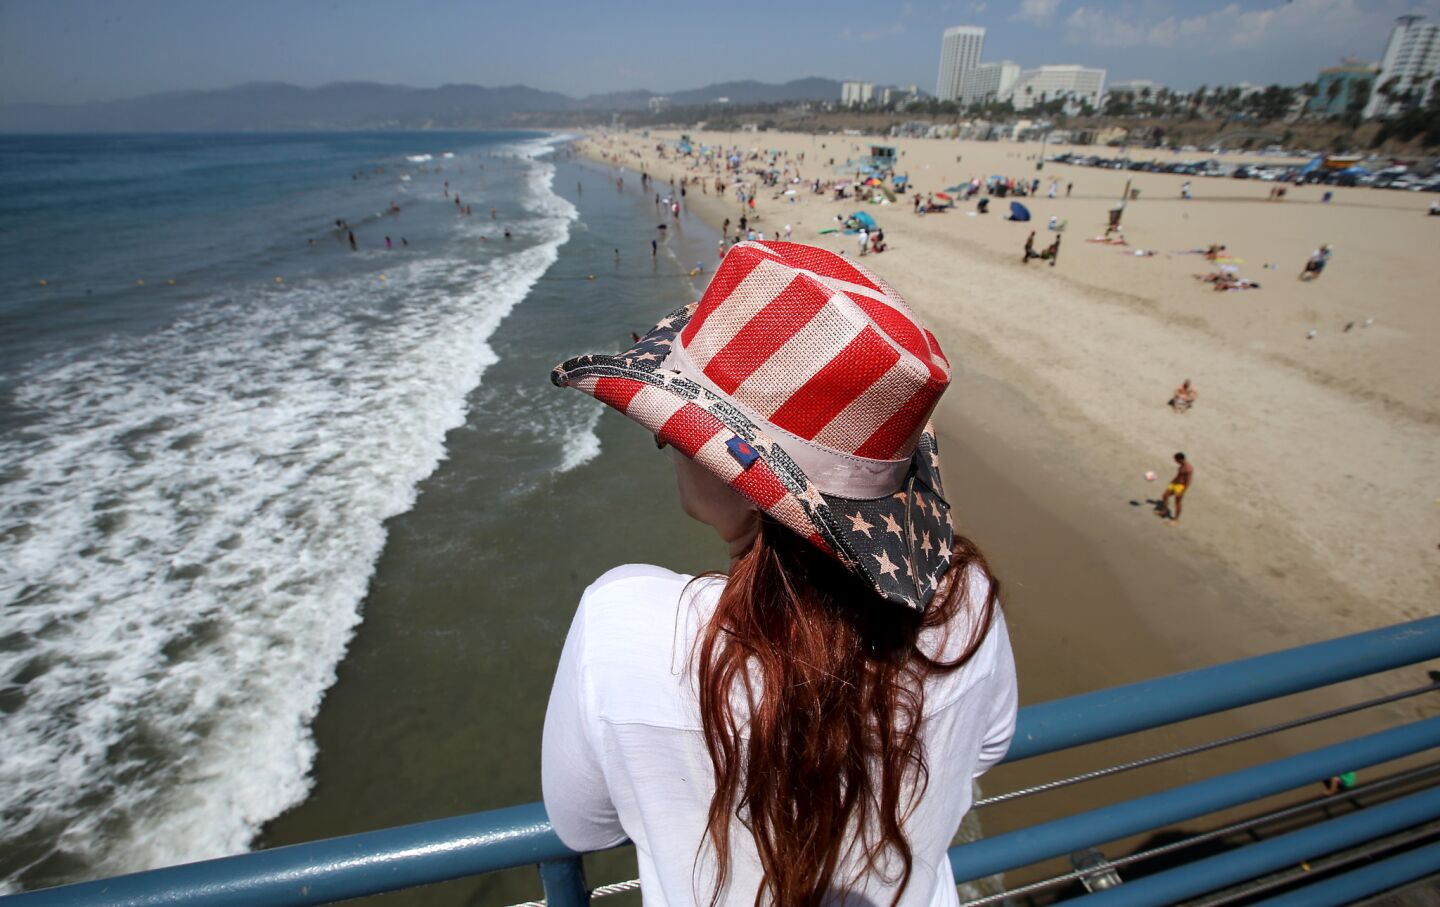 Crissie Sumerlin, a visitor from Baltimore, takes in the view and the cool breeze at Santa Monica Pier as a heat wave continues to bake Southern California.